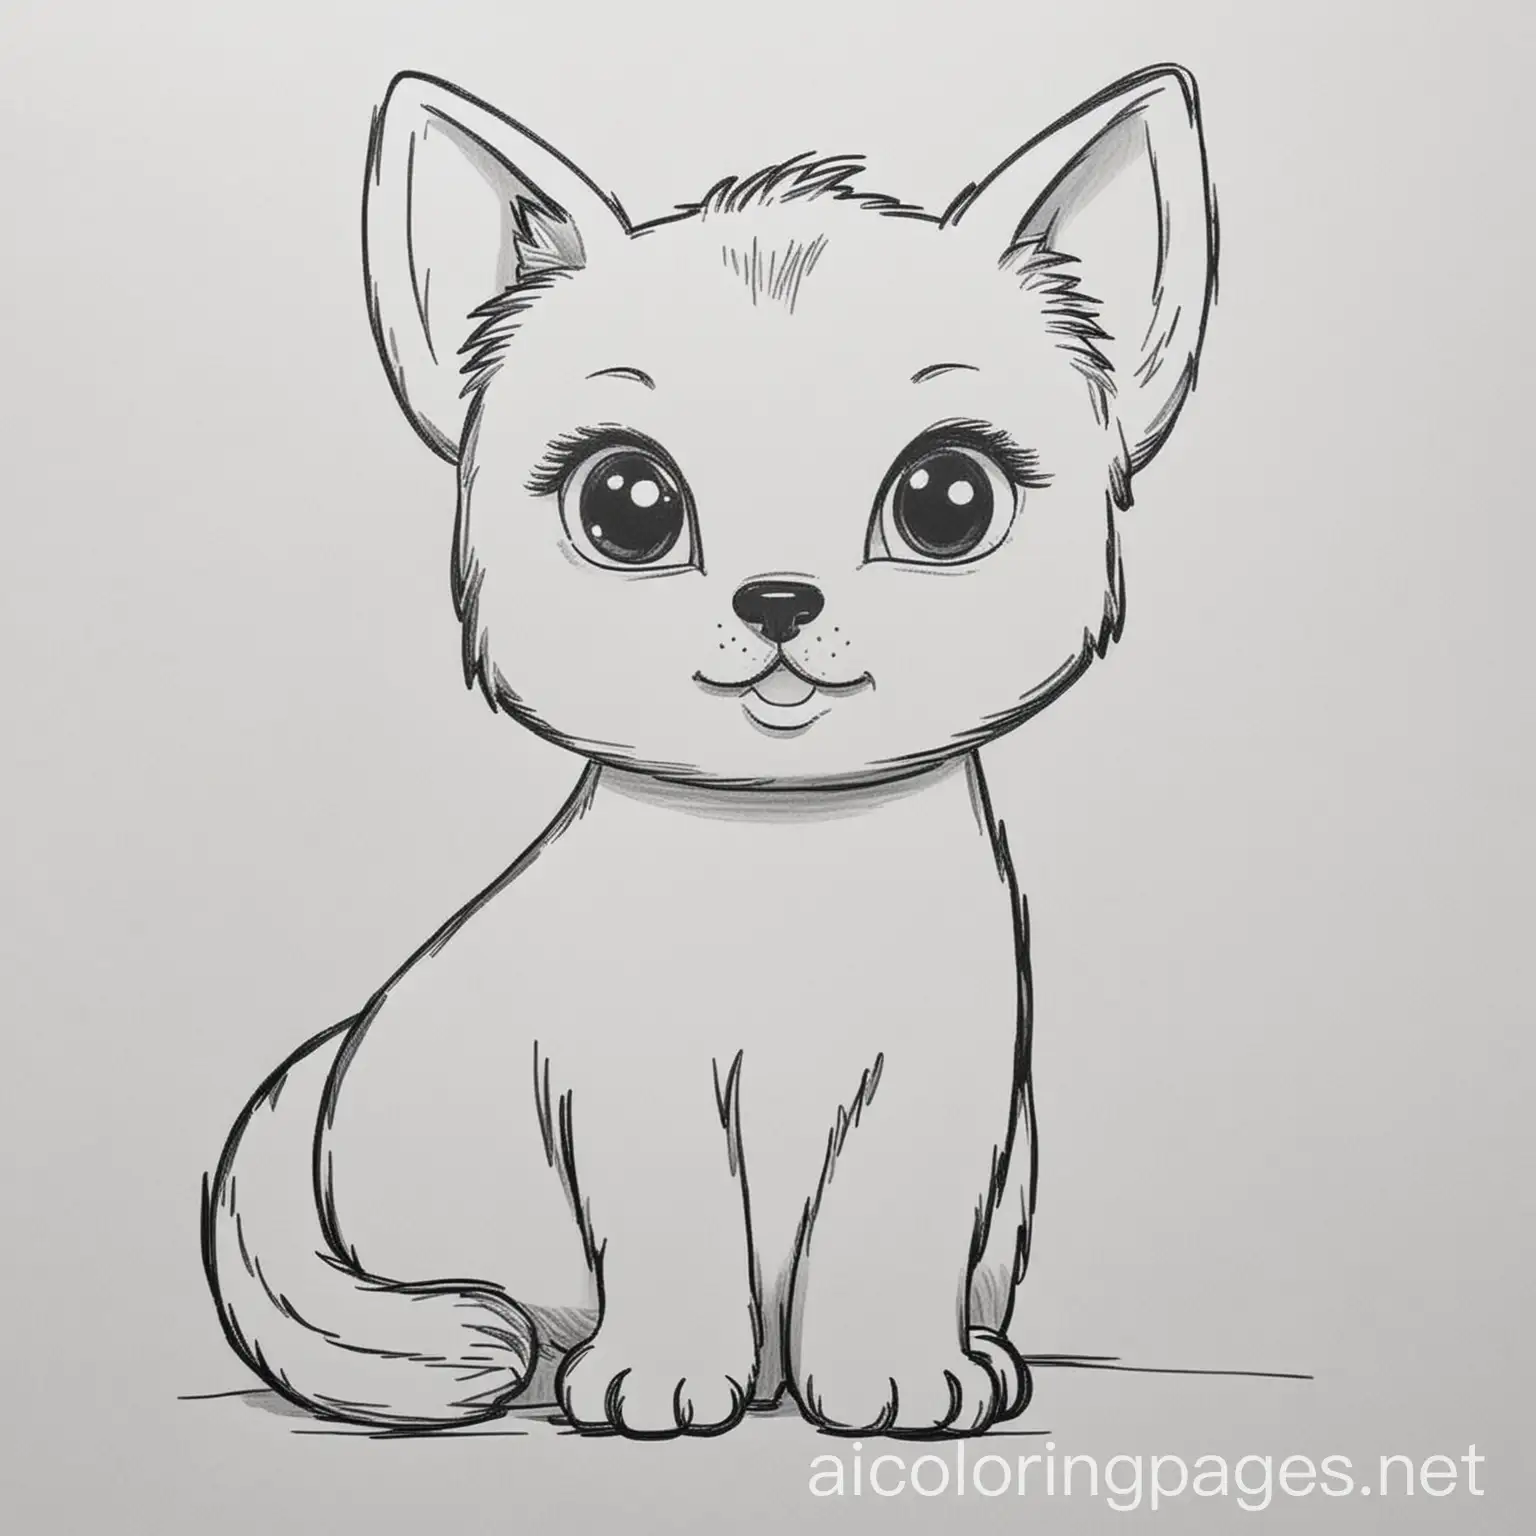 Pet animal, Coloring Page, black and white, line art, white background, Simplicity, Ample White Space. The background of the coloring page is plain white to make it easy for young children to color within the lines. The outlines of all the subjects are easy to distinguish, making it simple for kids to color without too much difficulty